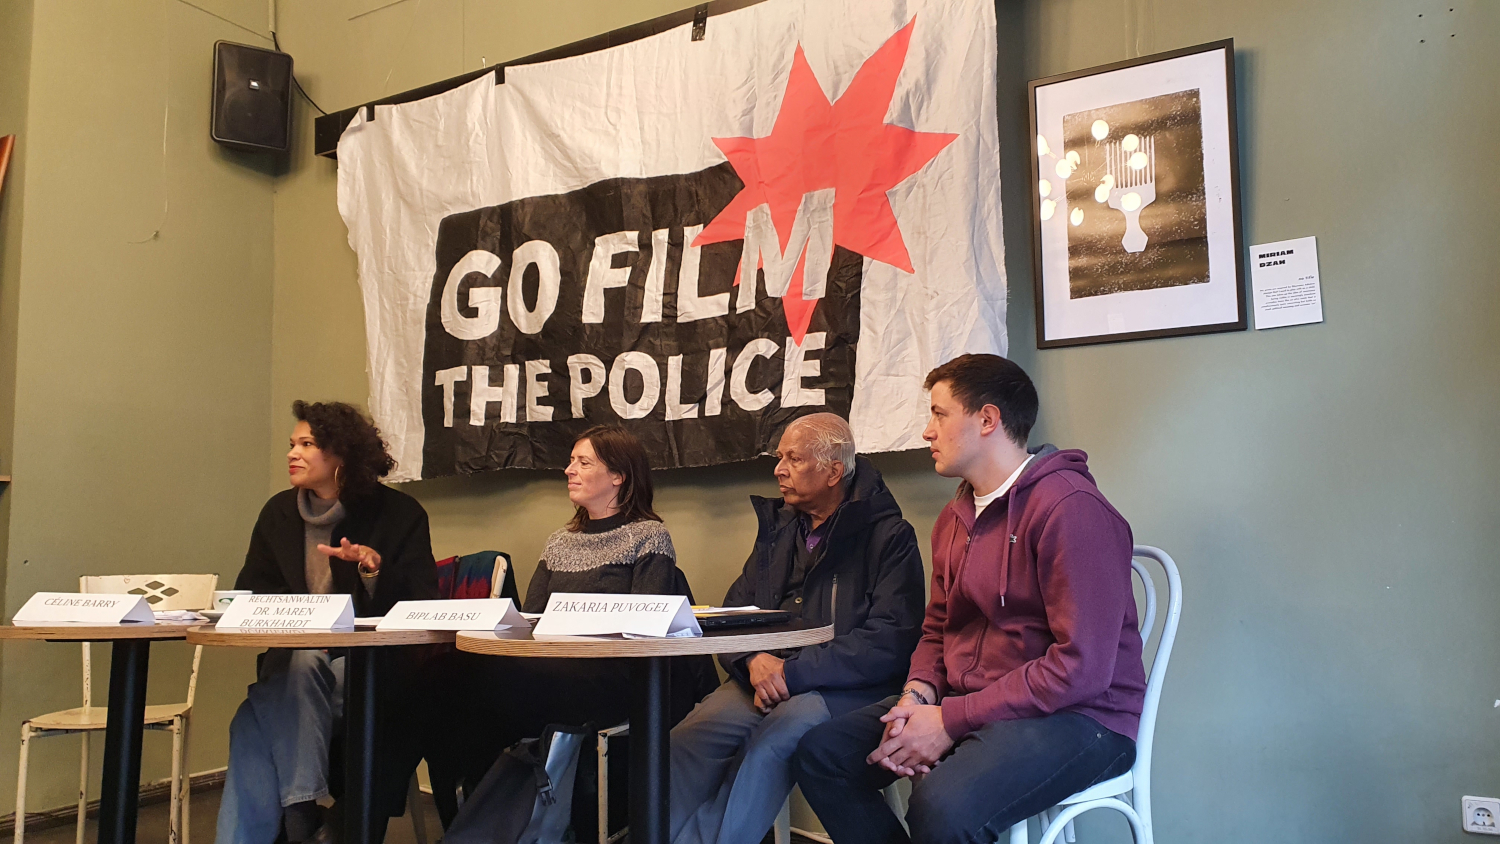 Go film the police: How the police want to define the „de facto public“